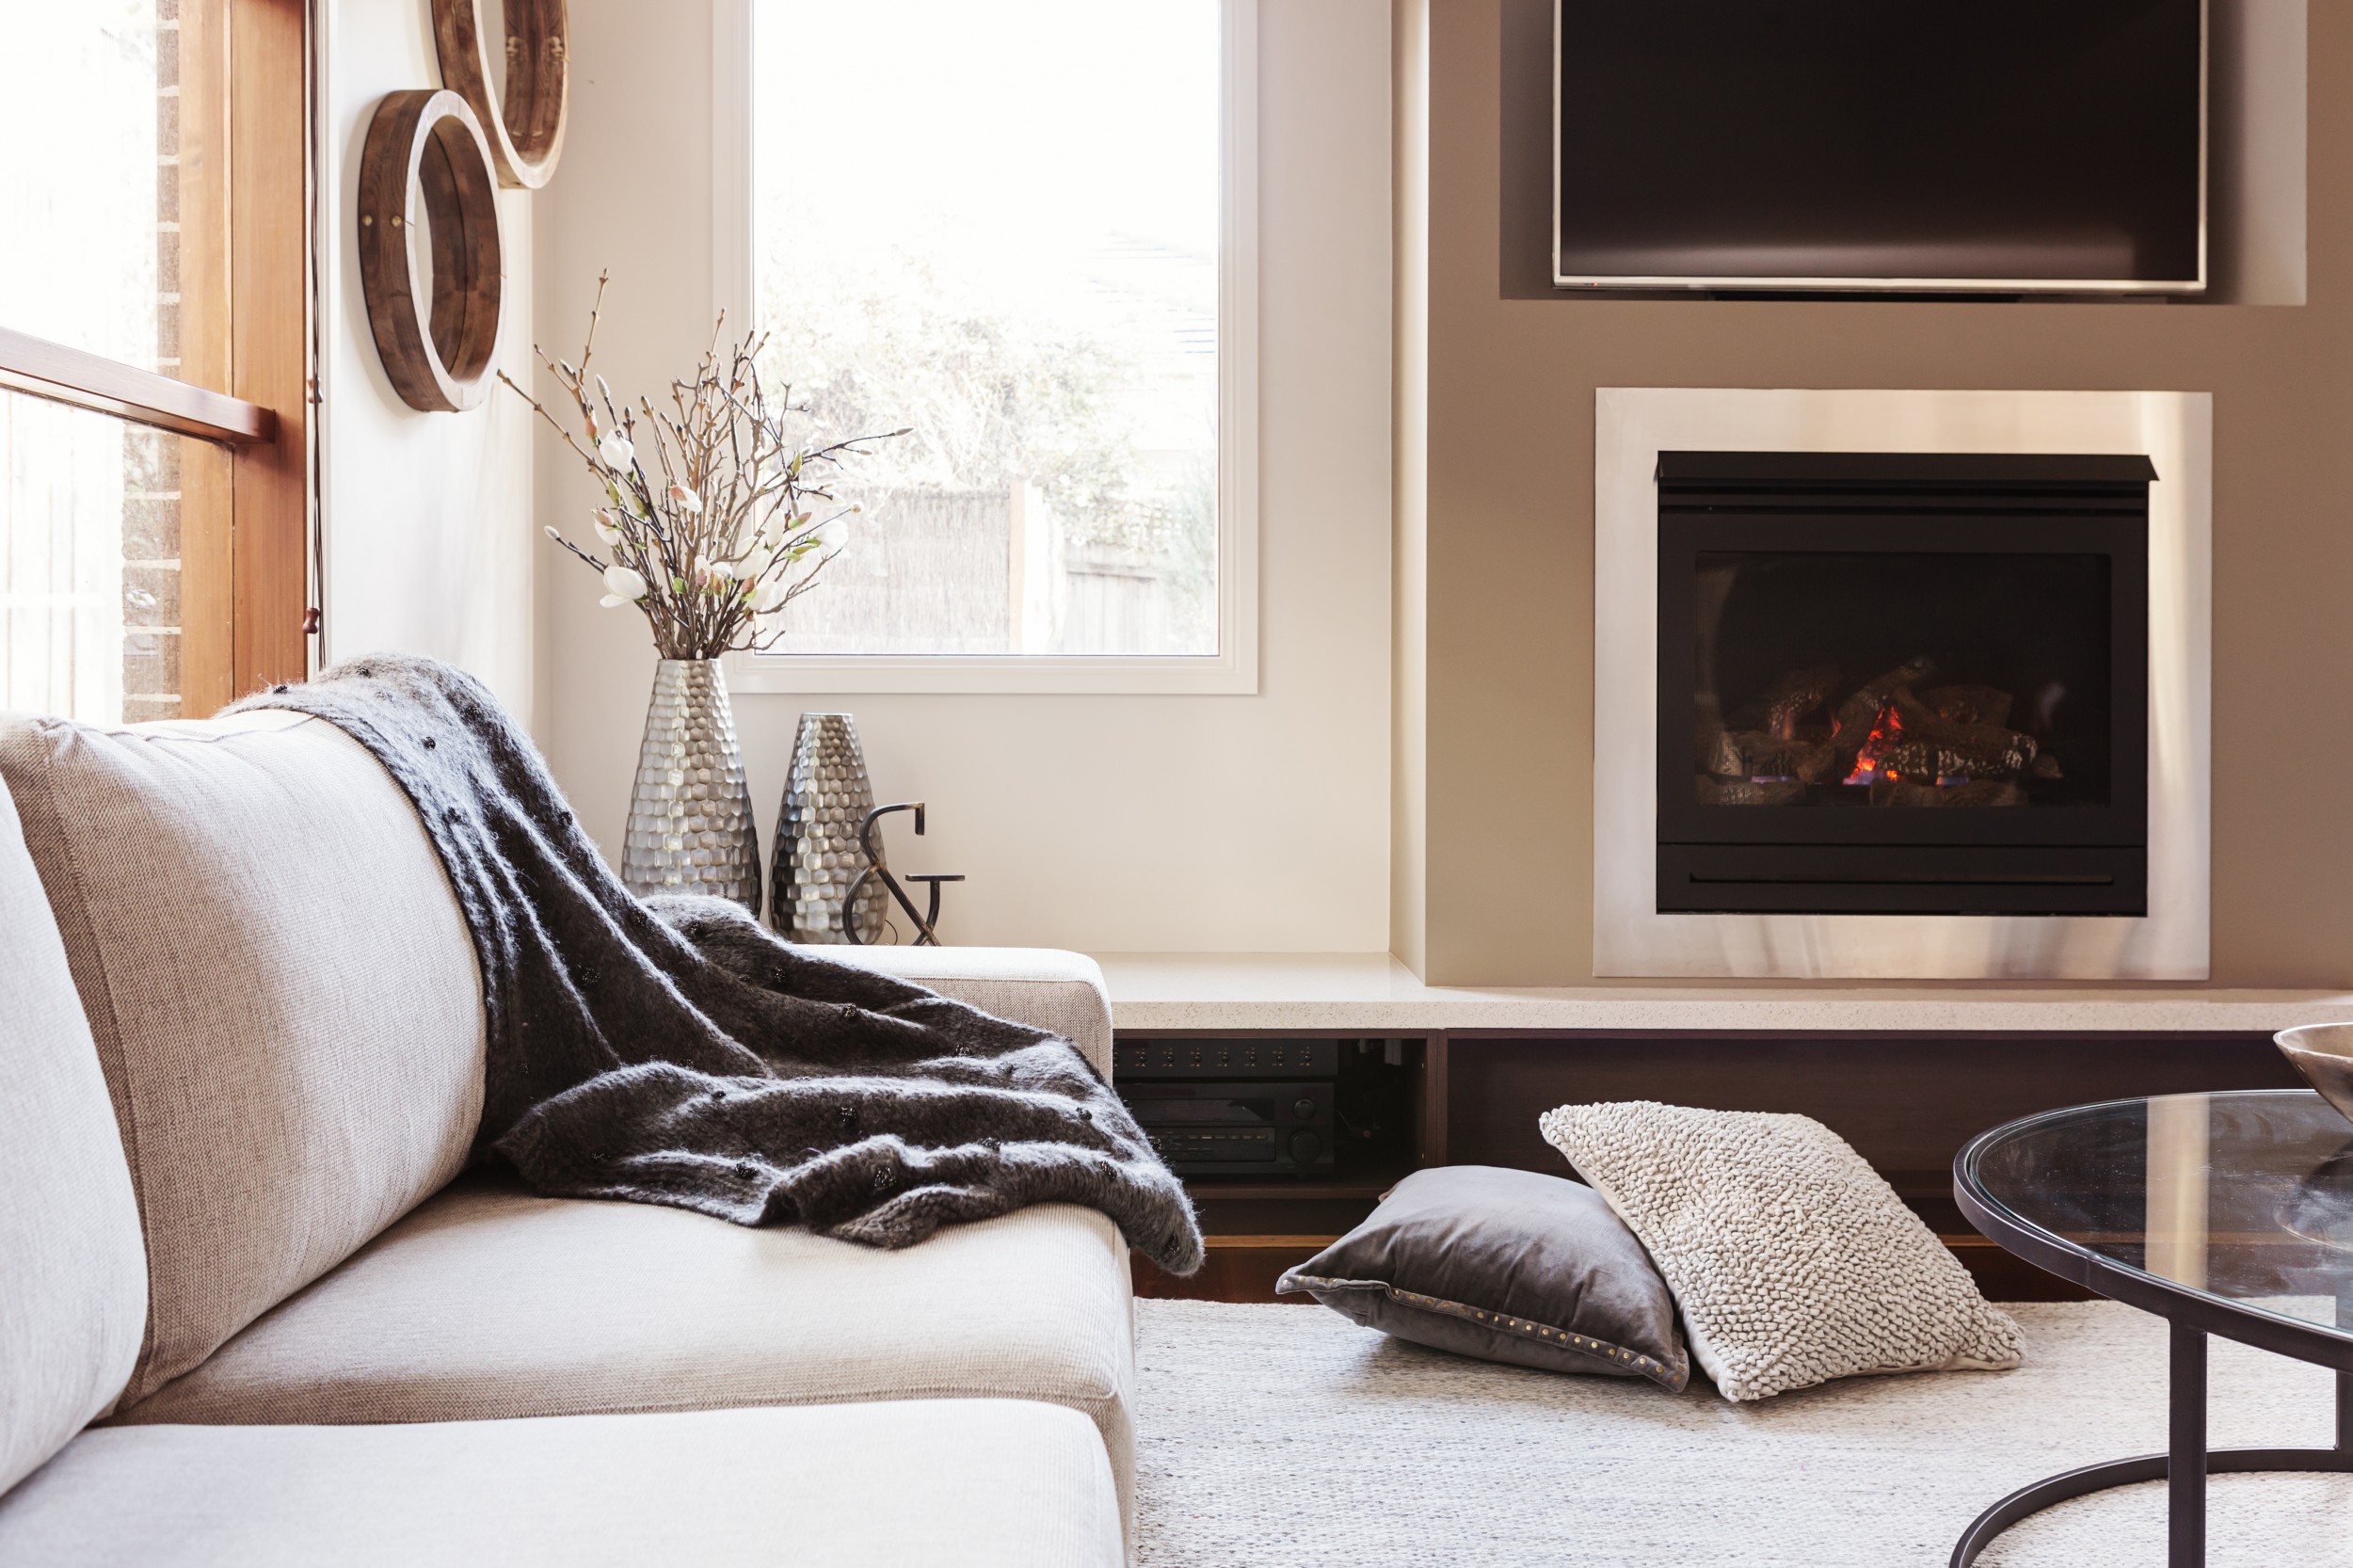 How to prepare your home for the winter weather